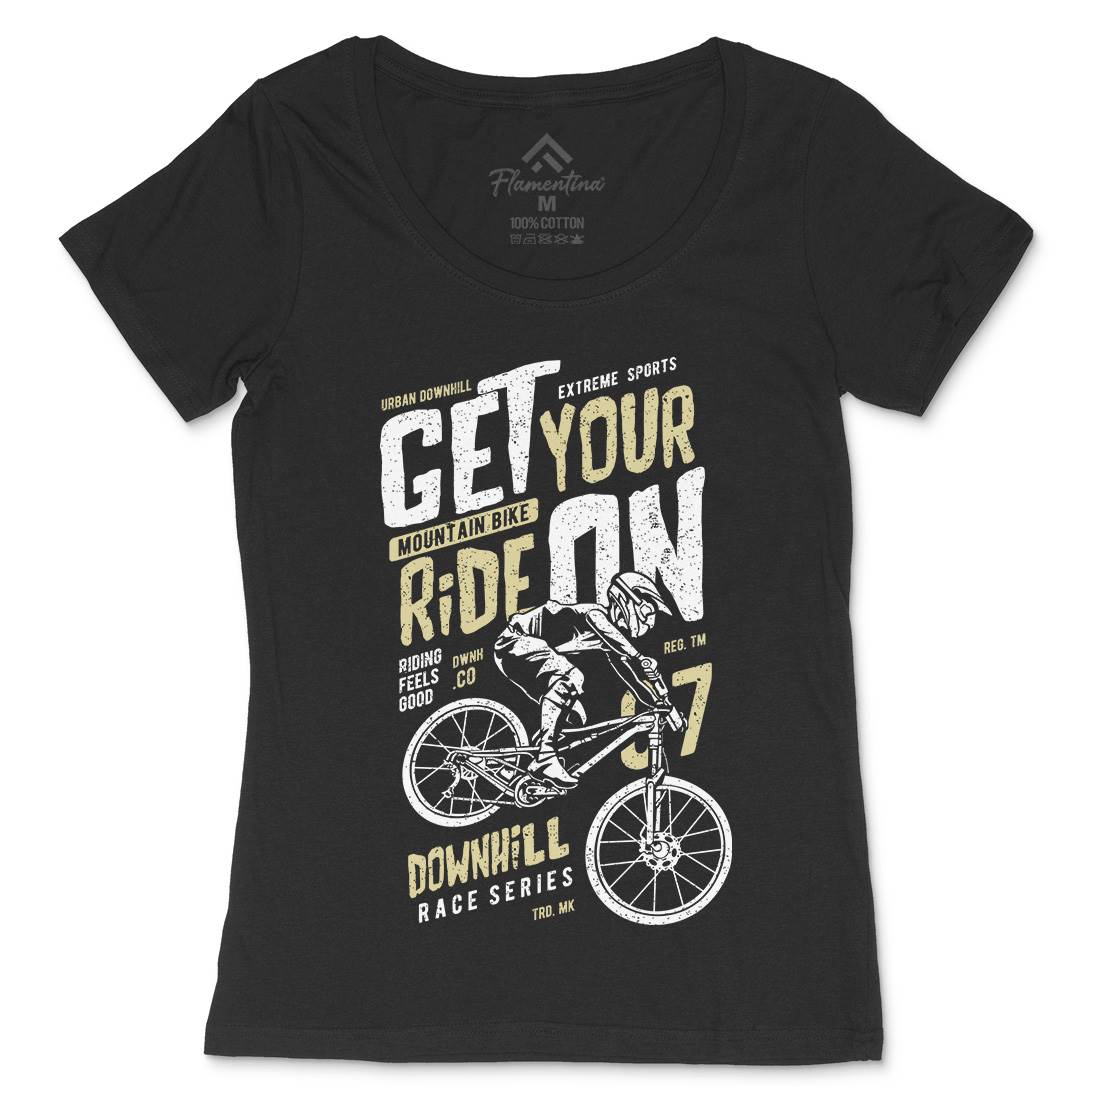 Get Your Ride Womens Scoop Neck T-Shirt Bikes A673